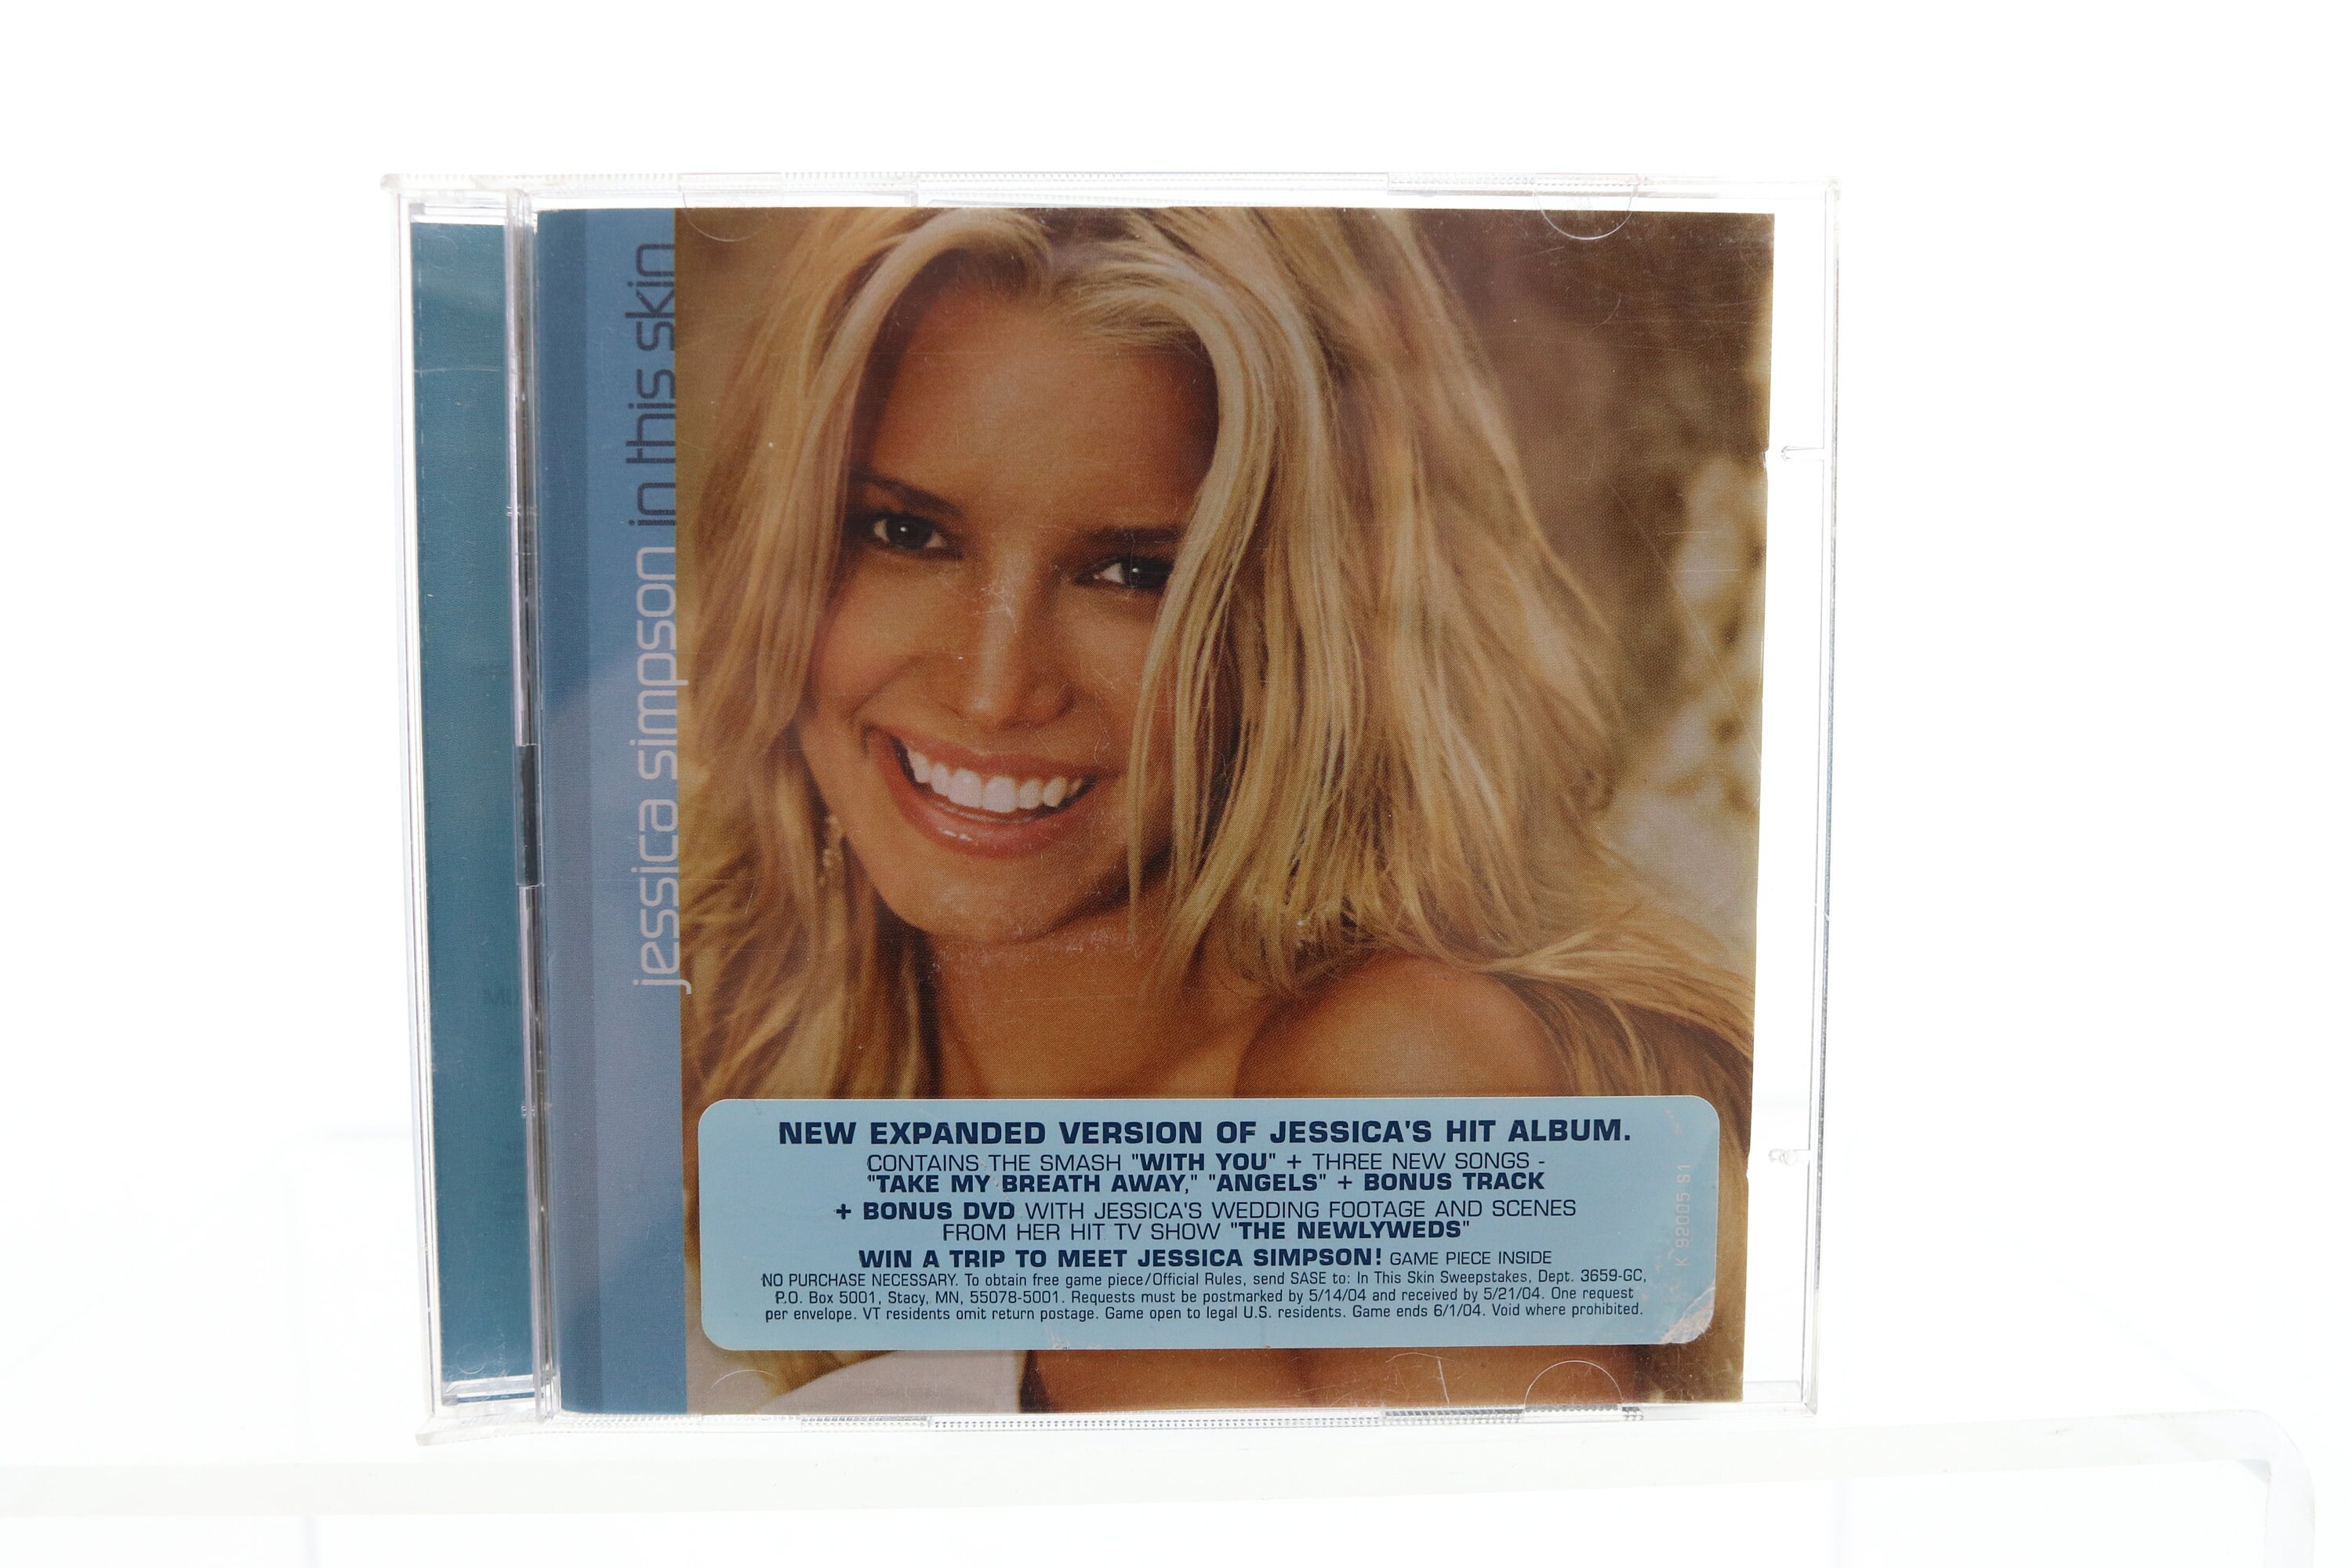 Jessica Simpson in This Skin CD - Etsy